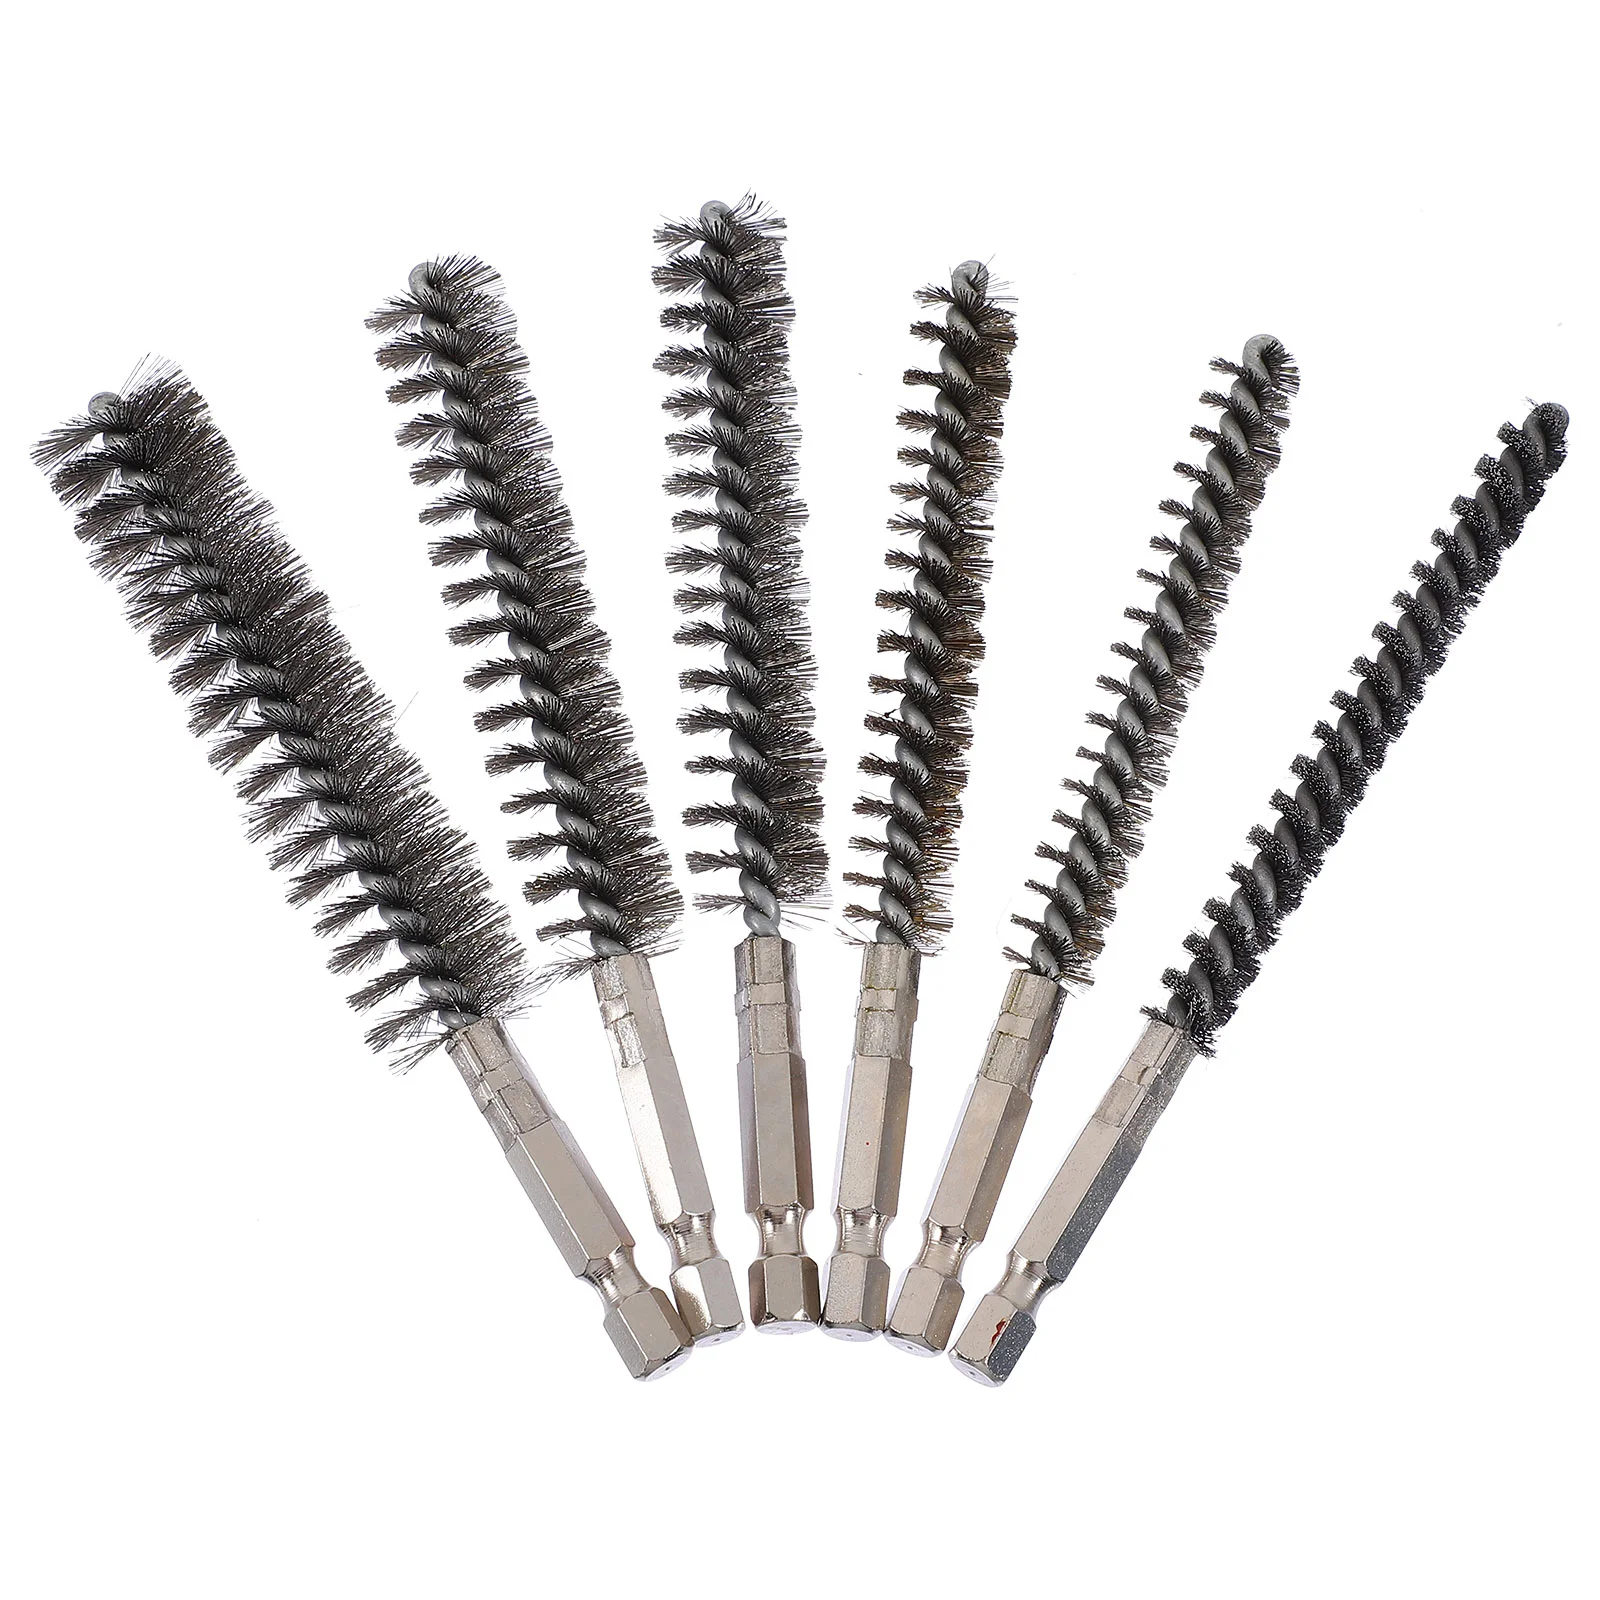 

6Pcs Stainless Steel Bore Brush with Hex Shanks Metal Cleaning Brush for Power Drill Impact Driver